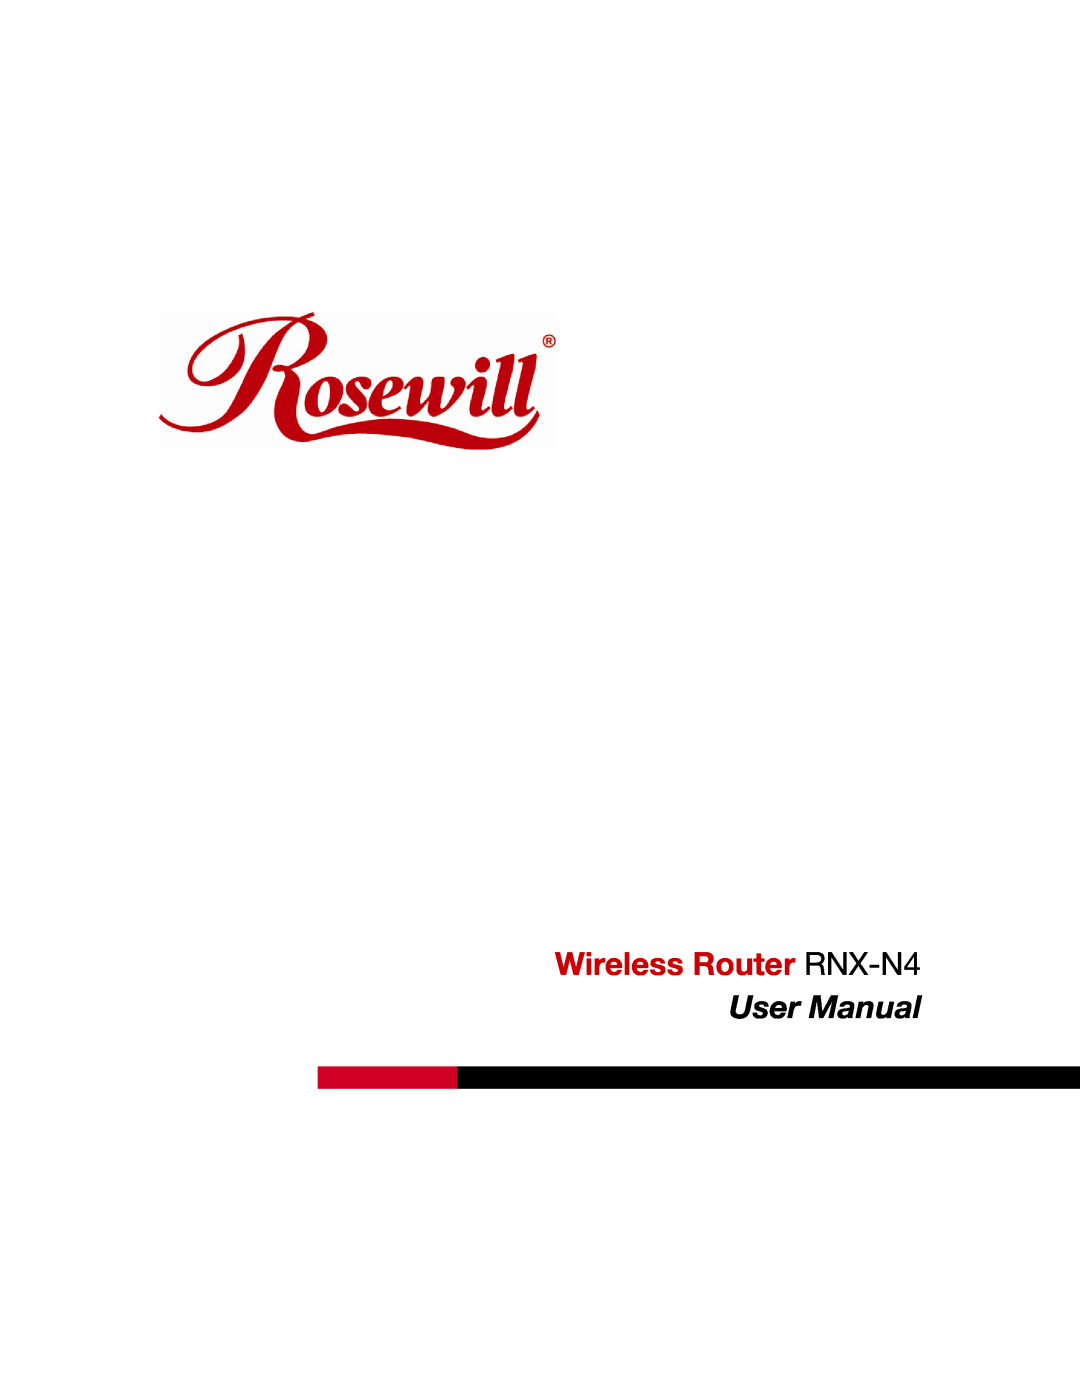 Rosewill user manual Wireless Router RNX-N4, User Manual 